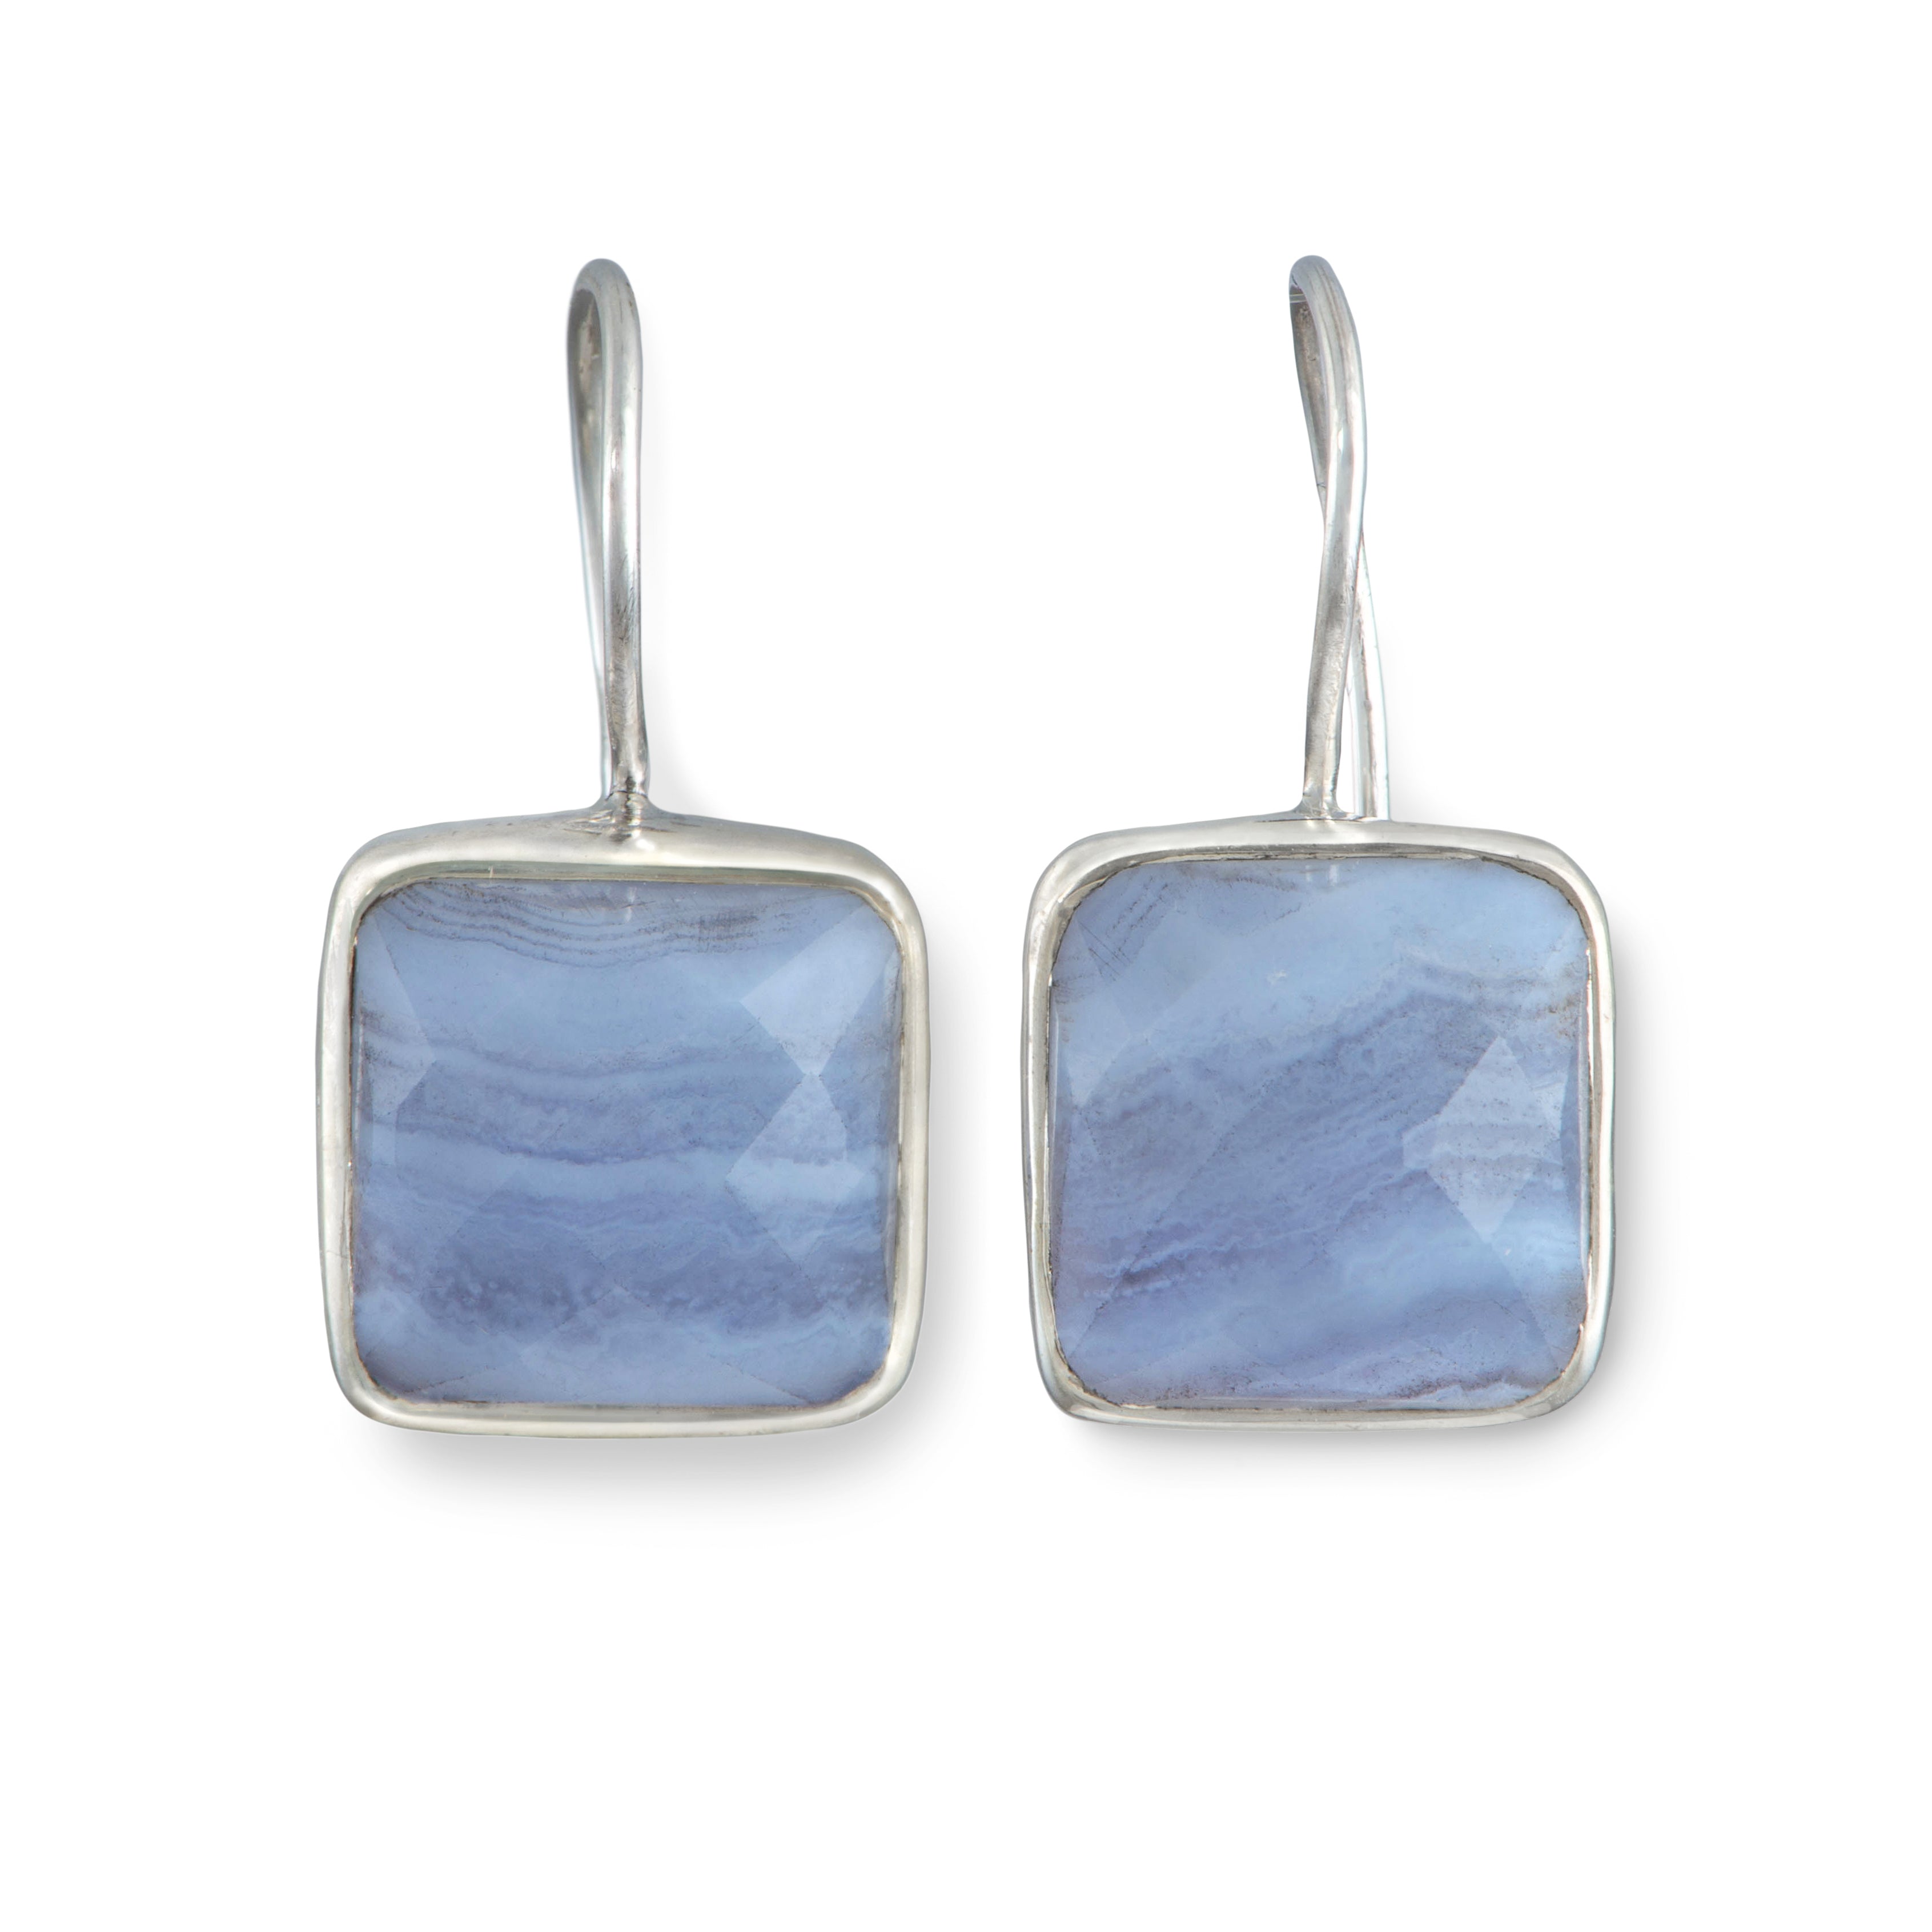 Sterling Silver Square Gemstone Earrings - Blue Laced Agate